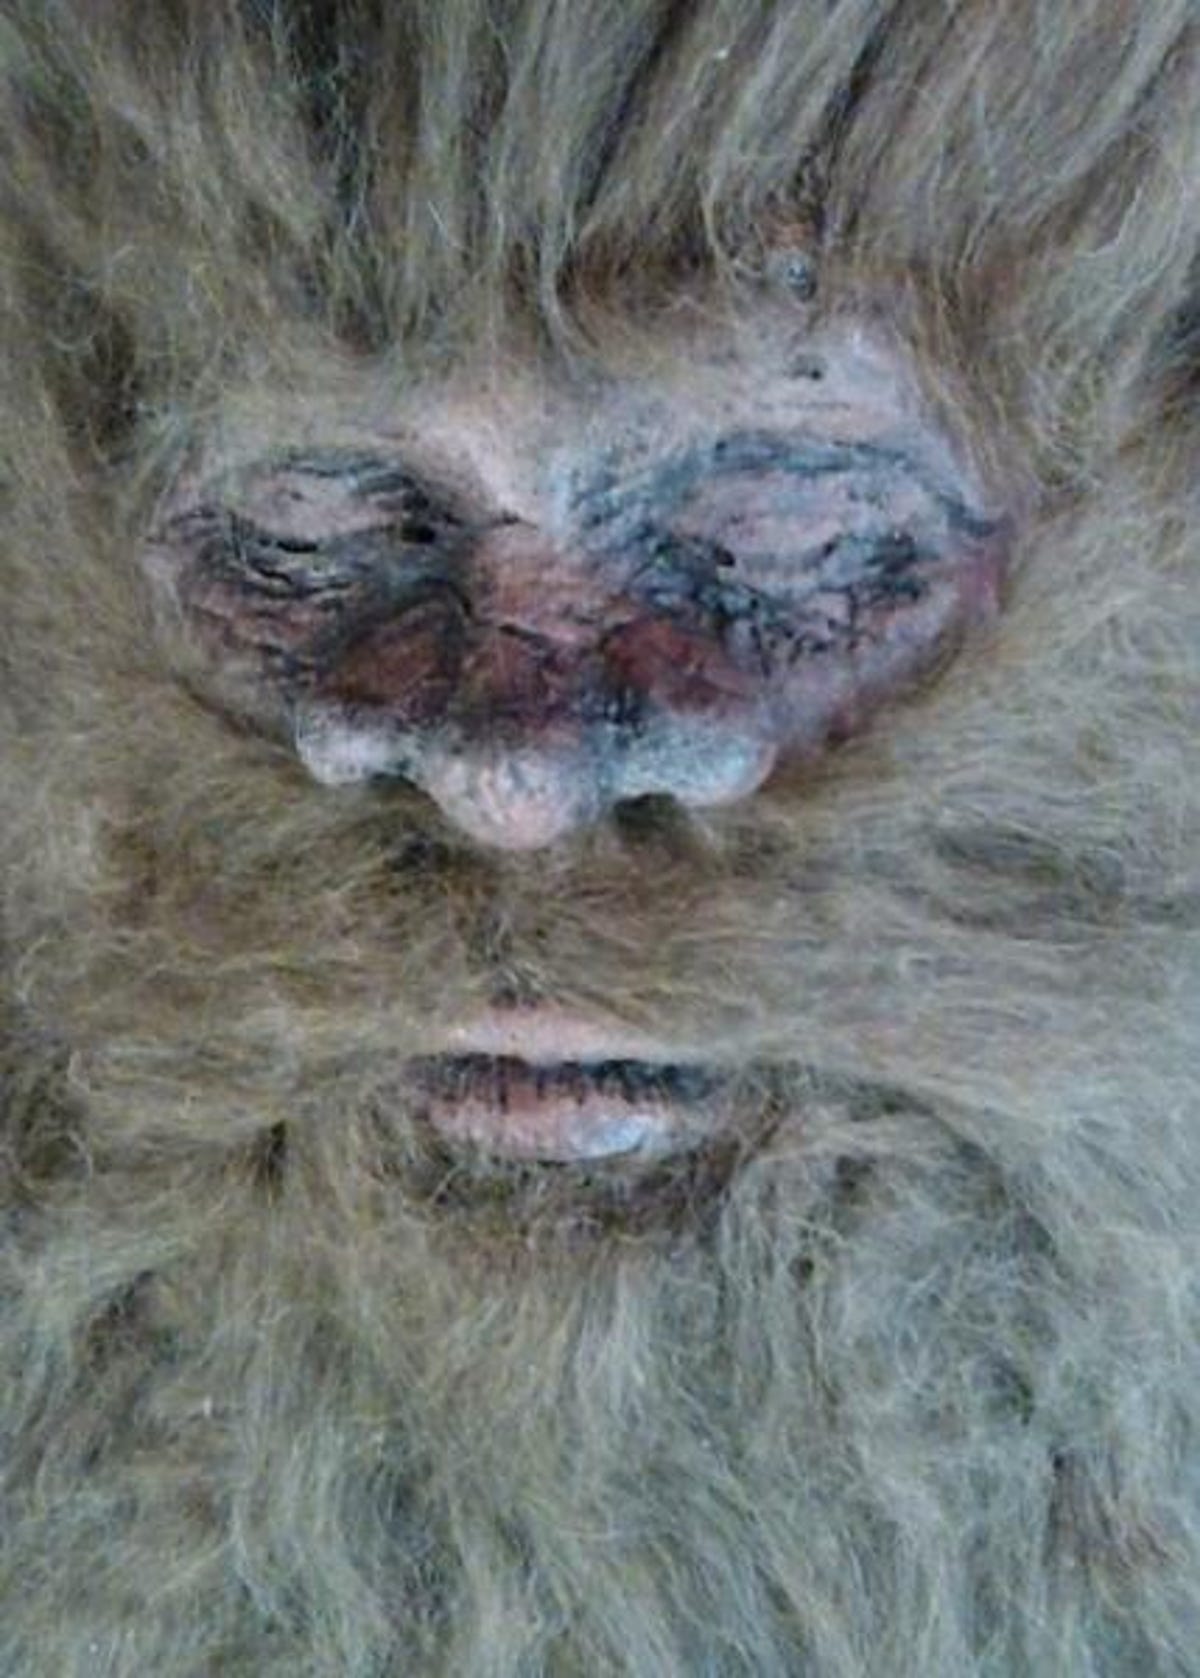 According to hunter Rick Dyer, this deceased Bigfoot is eight feet tall and a over 700 pounds.